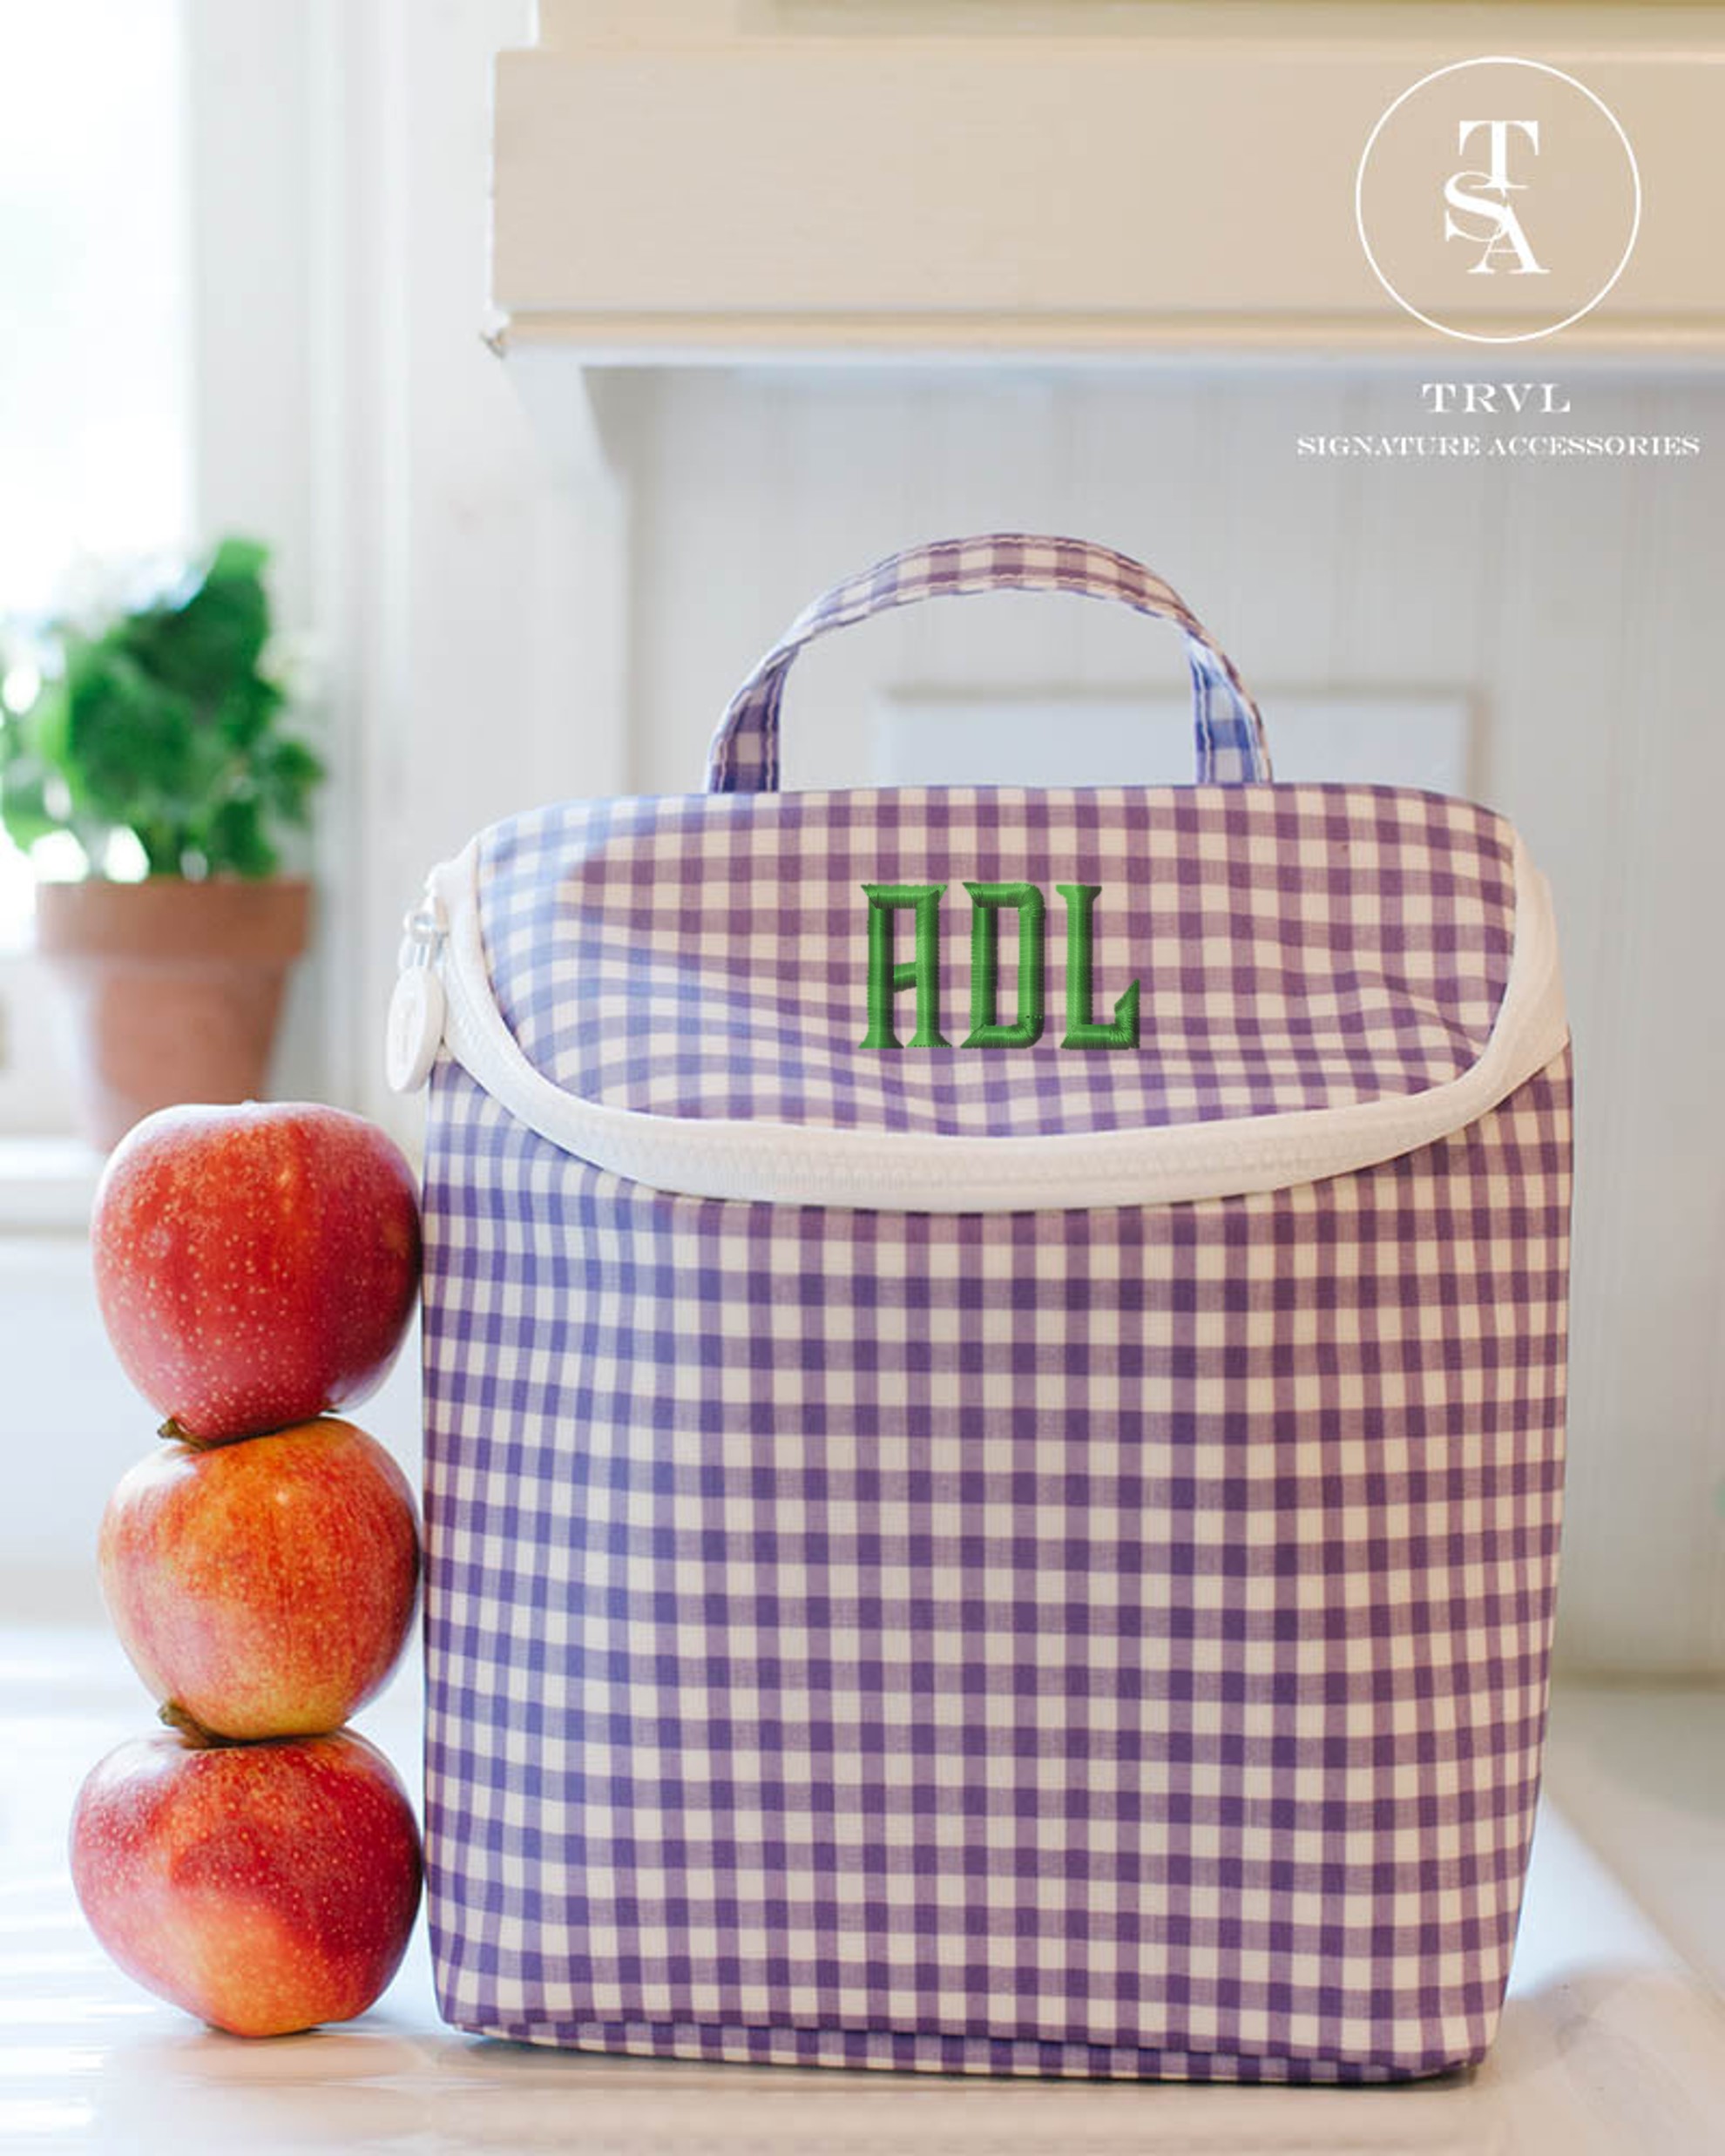 Monogrammed Lunch Box, Back to School, Lunchbox, Girls Lunch Box, Boys Lunch  Box, Kids Lunch Box, Preppy Lunch Box, Personalized Lunchboxes 